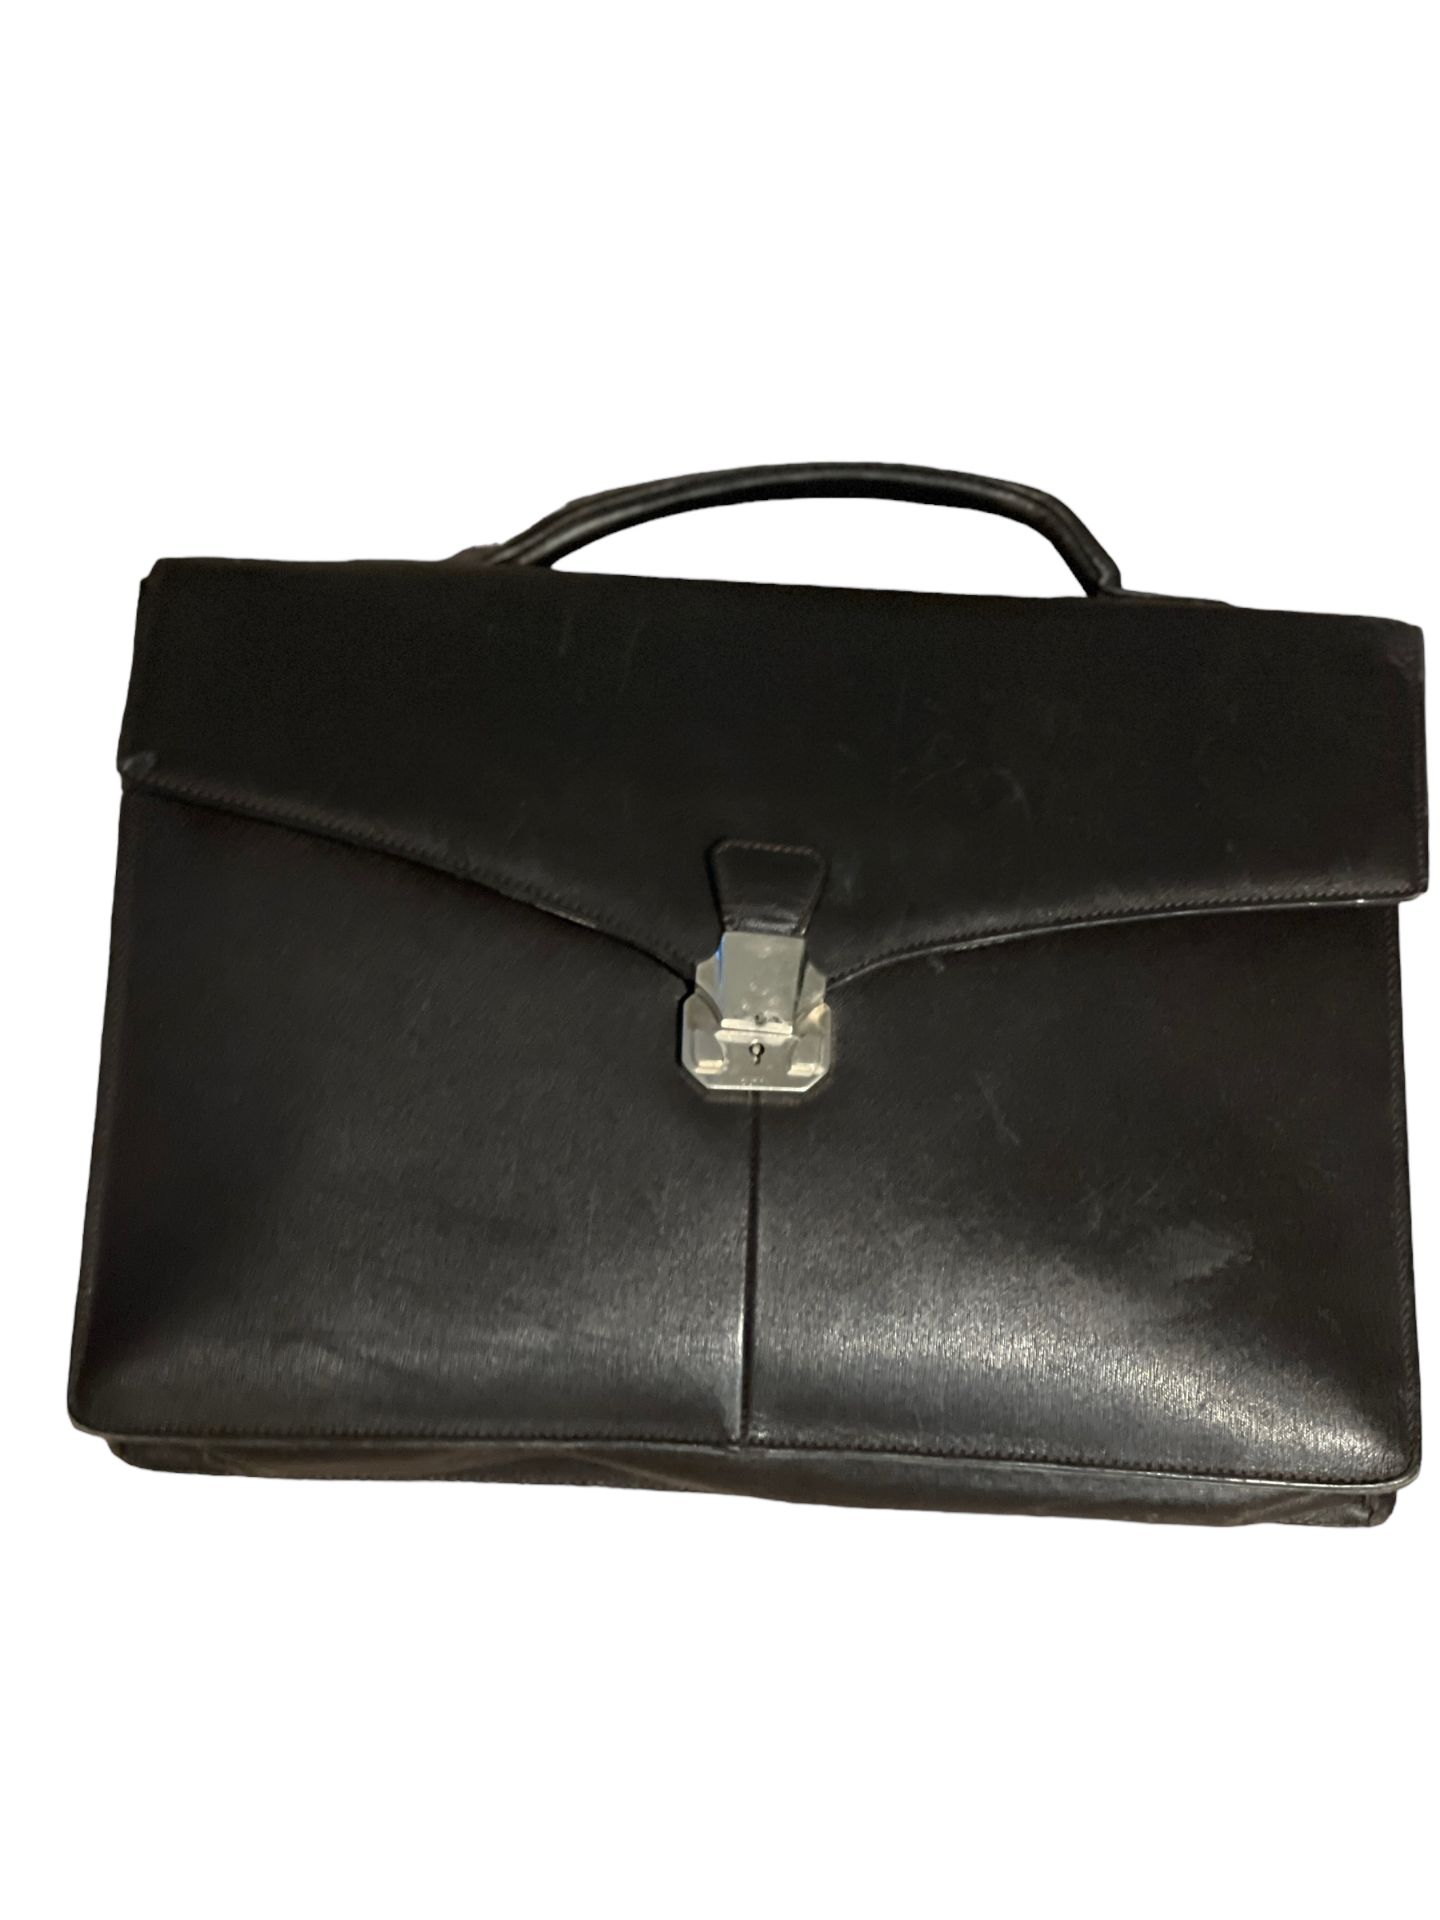 Dunhill Leather lost baggage from private. jet charter - Image 8 of 9